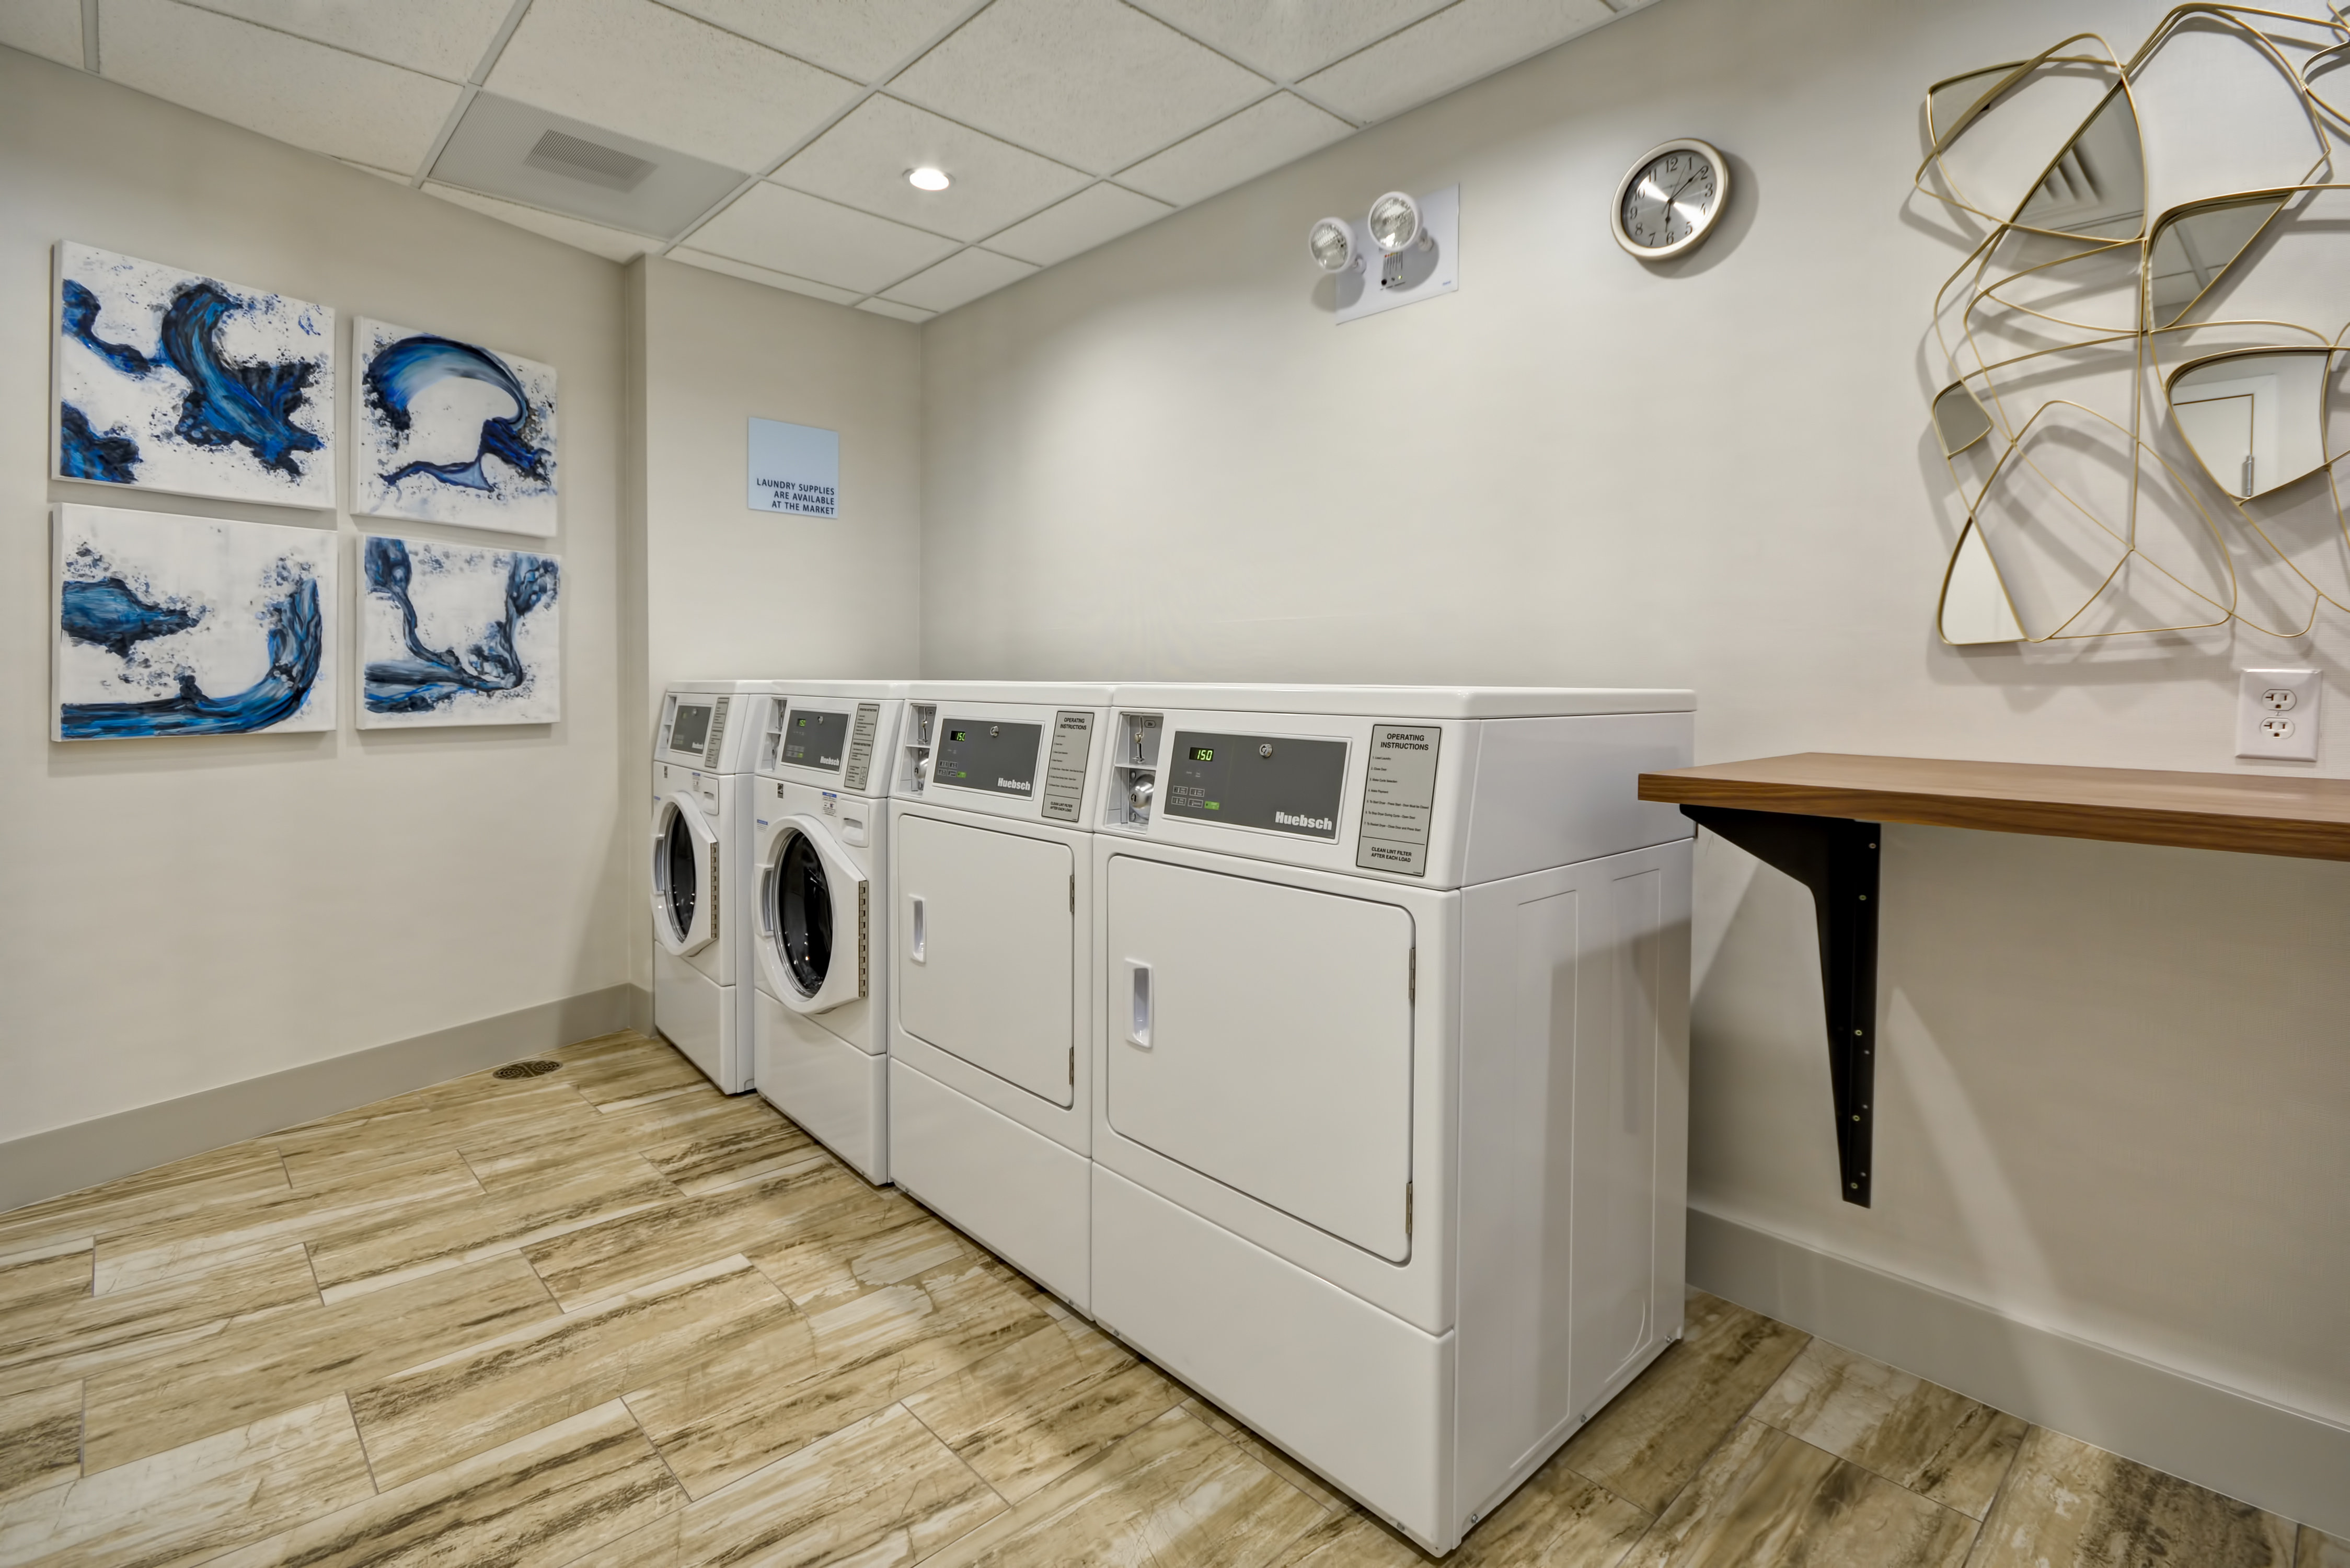 Holiday Inn Express East Evansville Coin Laundry